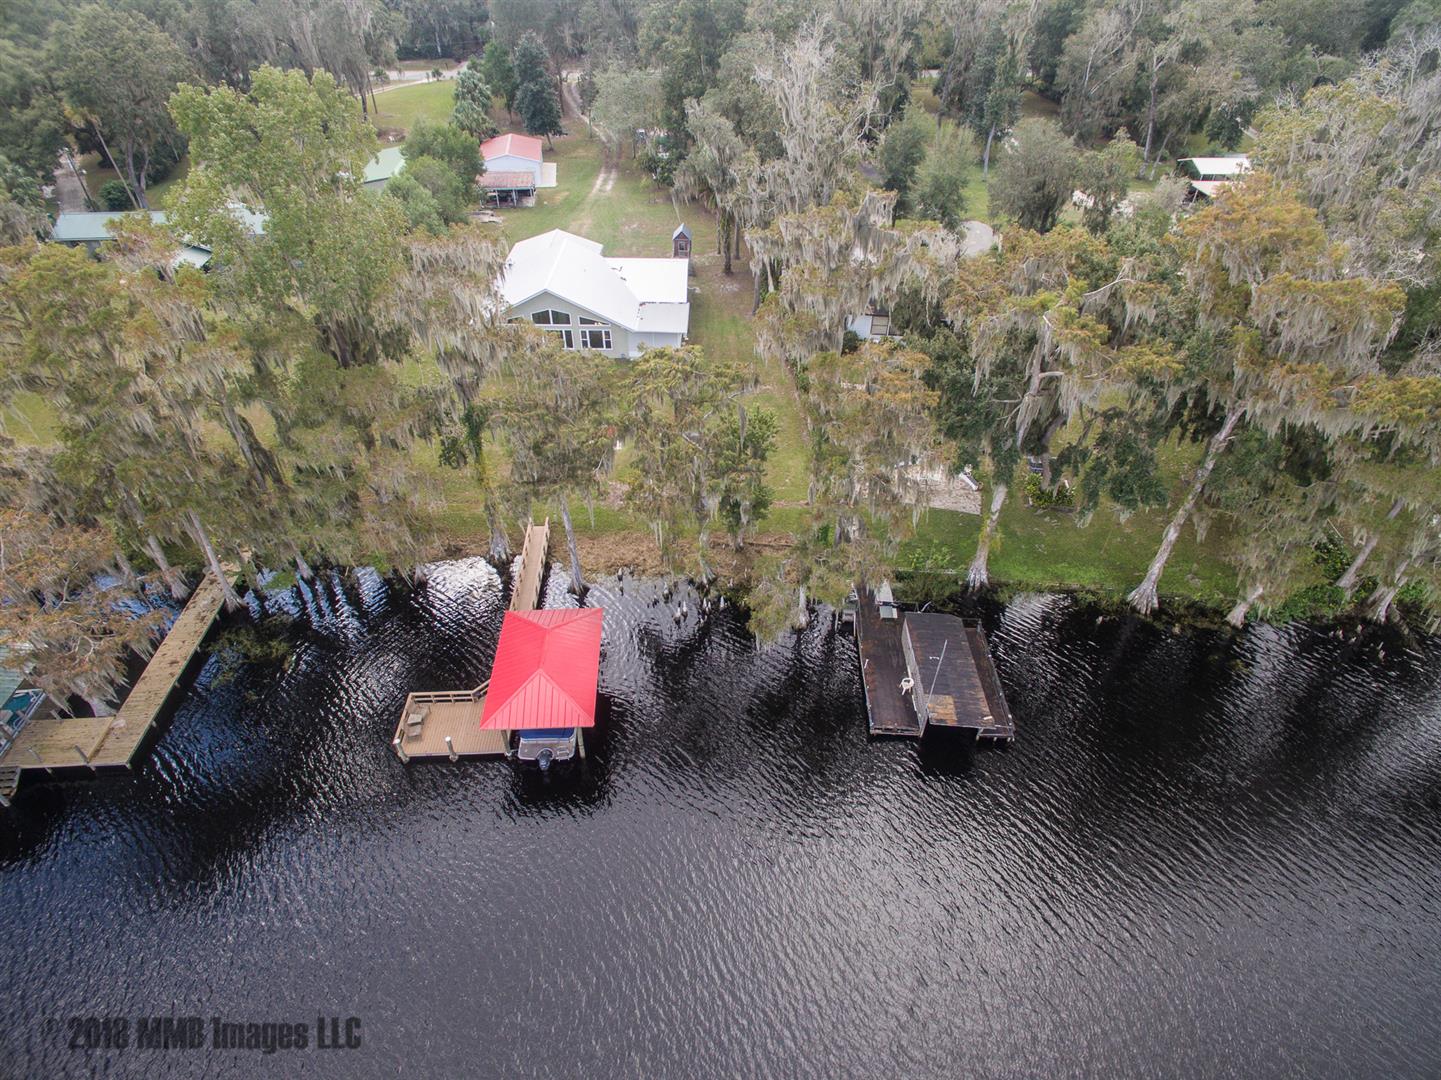 Aerial Photo of this Home for Sale on Lake Hampton in Floral City, Citrus County